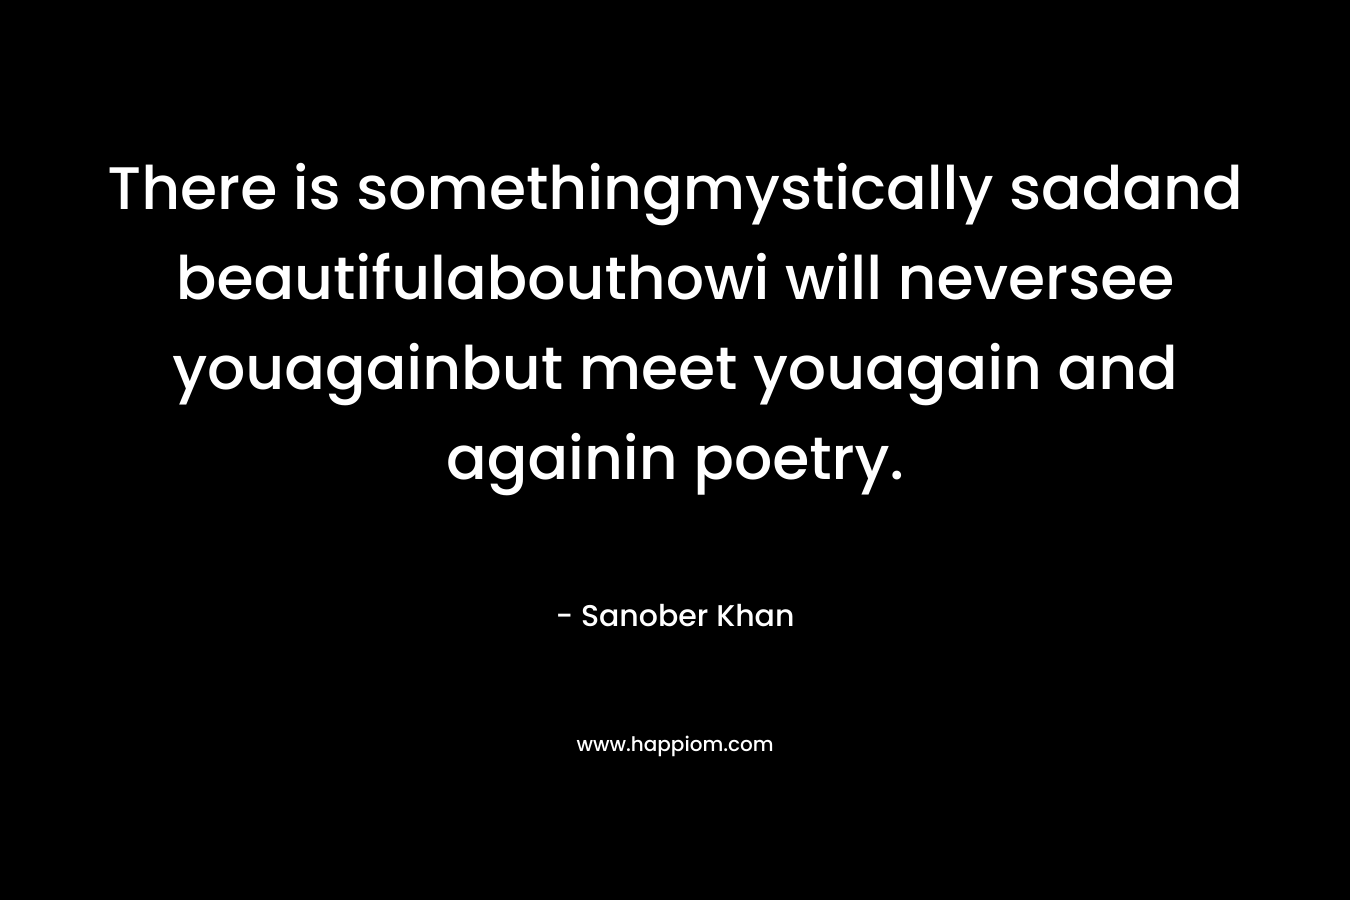 There is somethingmystically sadand beautifulabouthowi will neversee youagainbut meet youagain and againin poetry.